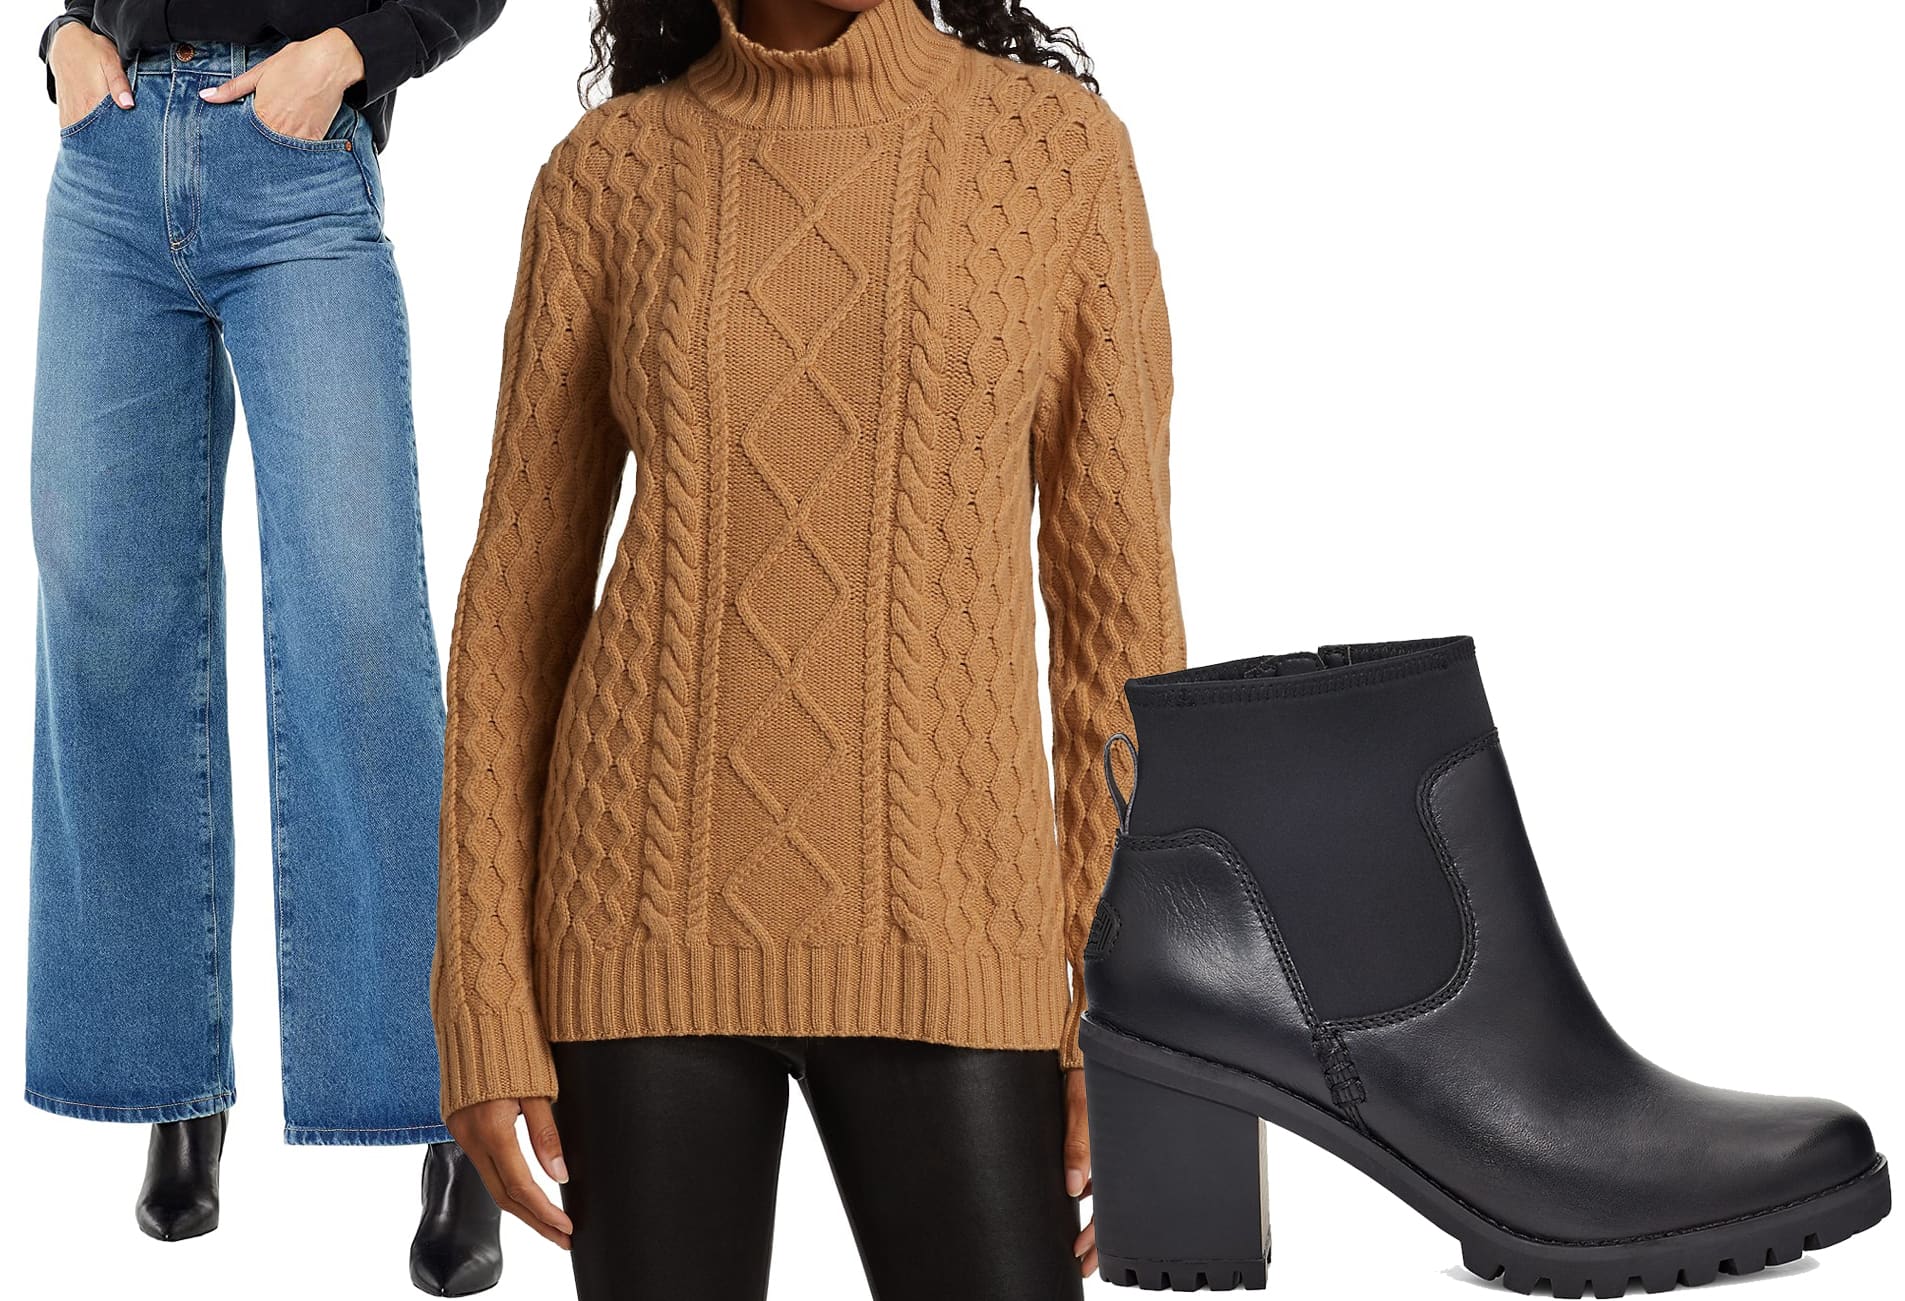 AG Adriano Goldschmied Deven High-Rise Ultra Wide Leg in Republic, Saks Fifth Avenue Collection: Cable-Knit Wool-Cashmere Fisherman Sweater, UGG Amathea Waterproof Leather Boots